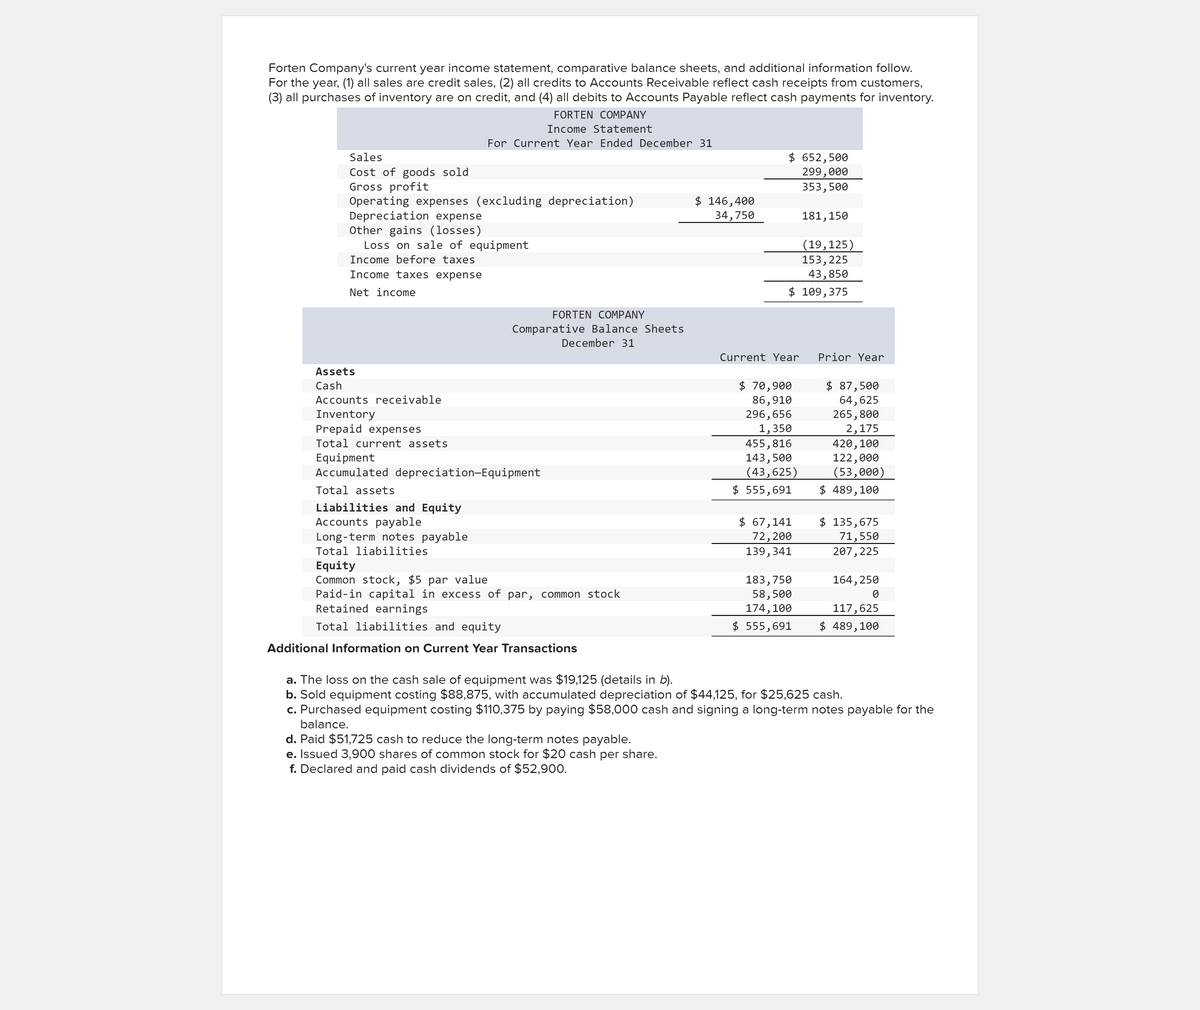 Forten Company's current year income statement, comparative balance sheets, and additional information follow.
For the year, (1) all sales are credit sales, (2) all credits to Accounts Receivable reflect cash receipts from customers,
(3) all purchases of inventory are on credit, and (4) all debits to Accounts Payable reflect cash payments for inventory.
Sales
Cost of goods sold
Gross profit
Operating expenses (excluding depreciation)
Depreciation expense
Other gains (losses)
Loss on sale of equipment
Income before taxes
Income taxes expense
Net income
Assets
Cash
FORTEN COMPANY
Income Statement
For Current Year Ended December 31
Accounts receivable
Inventory
Prepaid expenses
Total current assets
FORTEN COMPANY
Comparative Balance Sheets
December 31
Equipment
Accumulated depreciation-Equipment
Total assets
Liabilities and Equity
Accounts payable
Long-term notes payable
Total liabilities
Equity
Common stock, $5 par value
Paid-in capital in excess of par, common stock
Retained earnings
Total liabilities and equity
Additional Information on Current Year Transactions
$ 146,400
34,750
d. Paid $51,725 cash to reduce the long-term notes payable.
e. Issued 3,900 shares of common stock for $20 cash per share.
f. Declared and paid cash dividends of $52,900.
$ 652,500
299,000
353,500
Current Year
$ 109,375
$ 70,900
86,910
296,656
1,350
455,816
143,500
(43,625)
$ 555,691
$ 67,141
72,200
139,341
181,150
183,750
58,500
174,100
$ 555,691
(19,125)
153,225
43,850
Prior Year
$ 87,500
64,625
265,800
2,175
420, 100
122,000
(53,000)
$ 489,100
$ 135,675
71,550
207, 225
164, 250
0
117,625
$ 489,100
a. The loss on the cash sale of equipment was $19,125 (details in b).
b. Sold equipment costing $88,875, with accumulated depreciation of $44,125, for $25,625 cash.
c. Purchased equipment costing $110,375 by paying $58,000 cash and signing a long-term notes payable for the
balance.